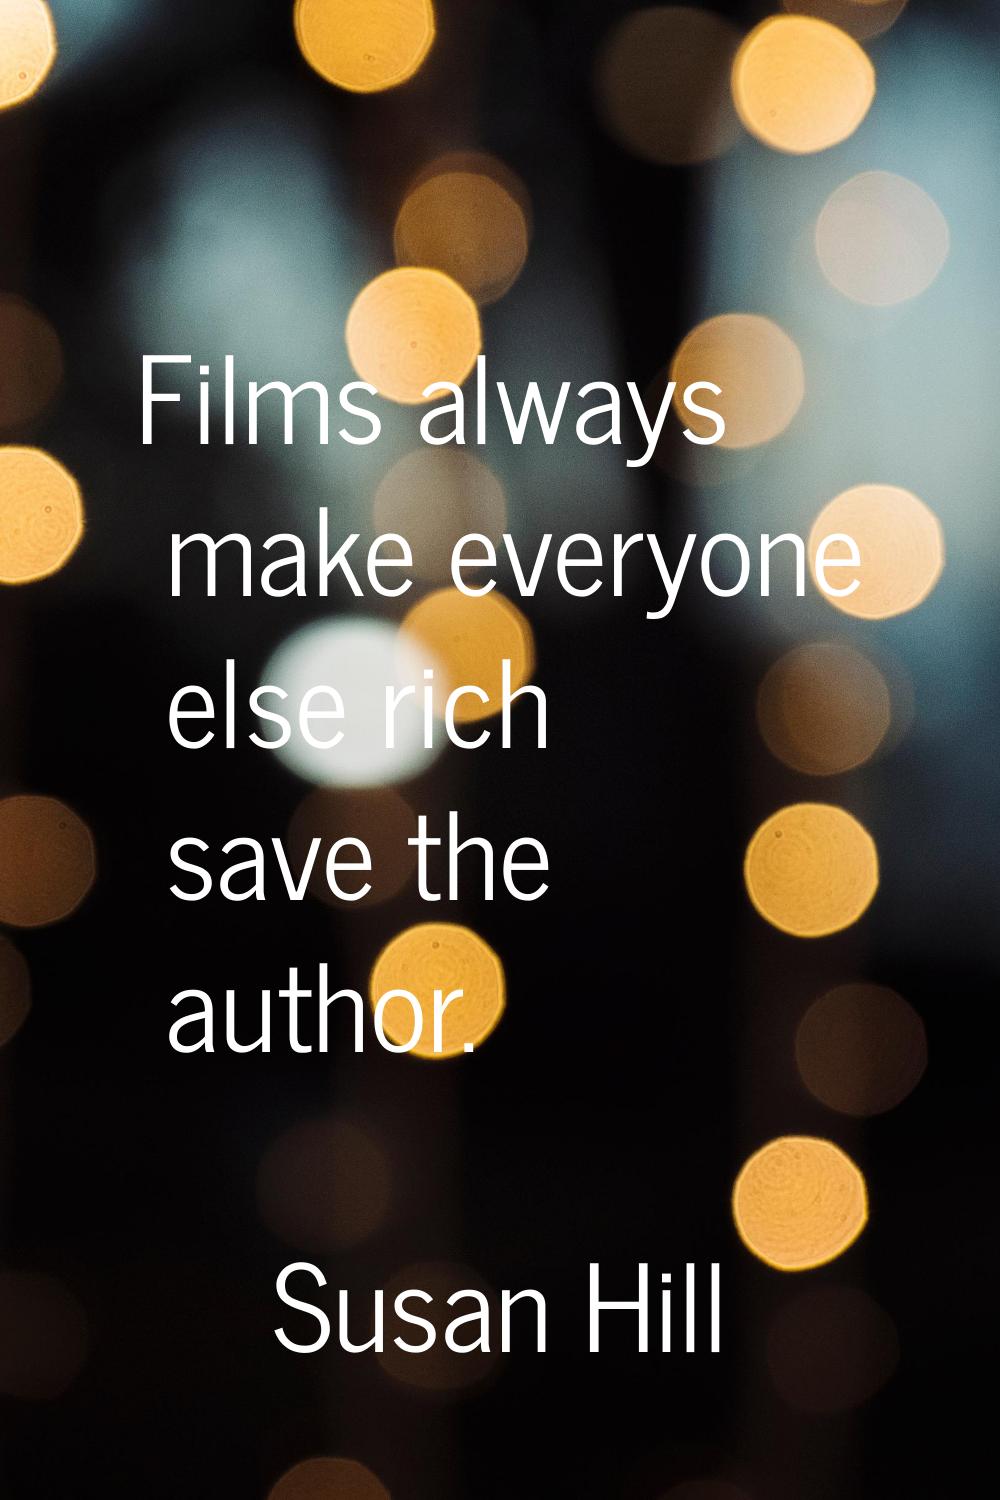 Films always make everyone else rich save the author.